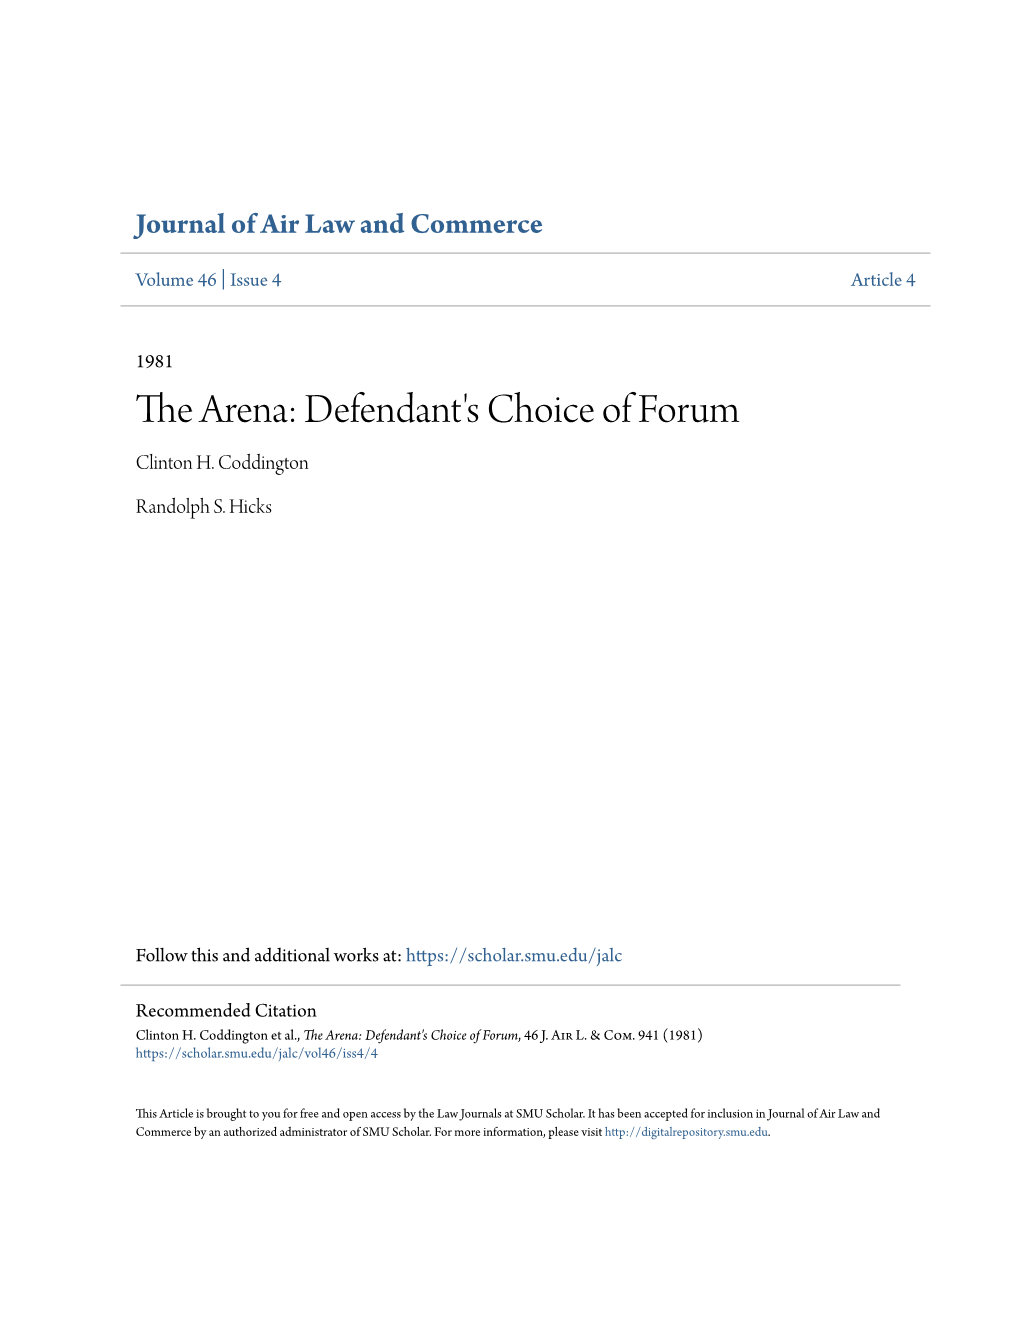 The Arena: Defendant's Choice of Forum Clinton H